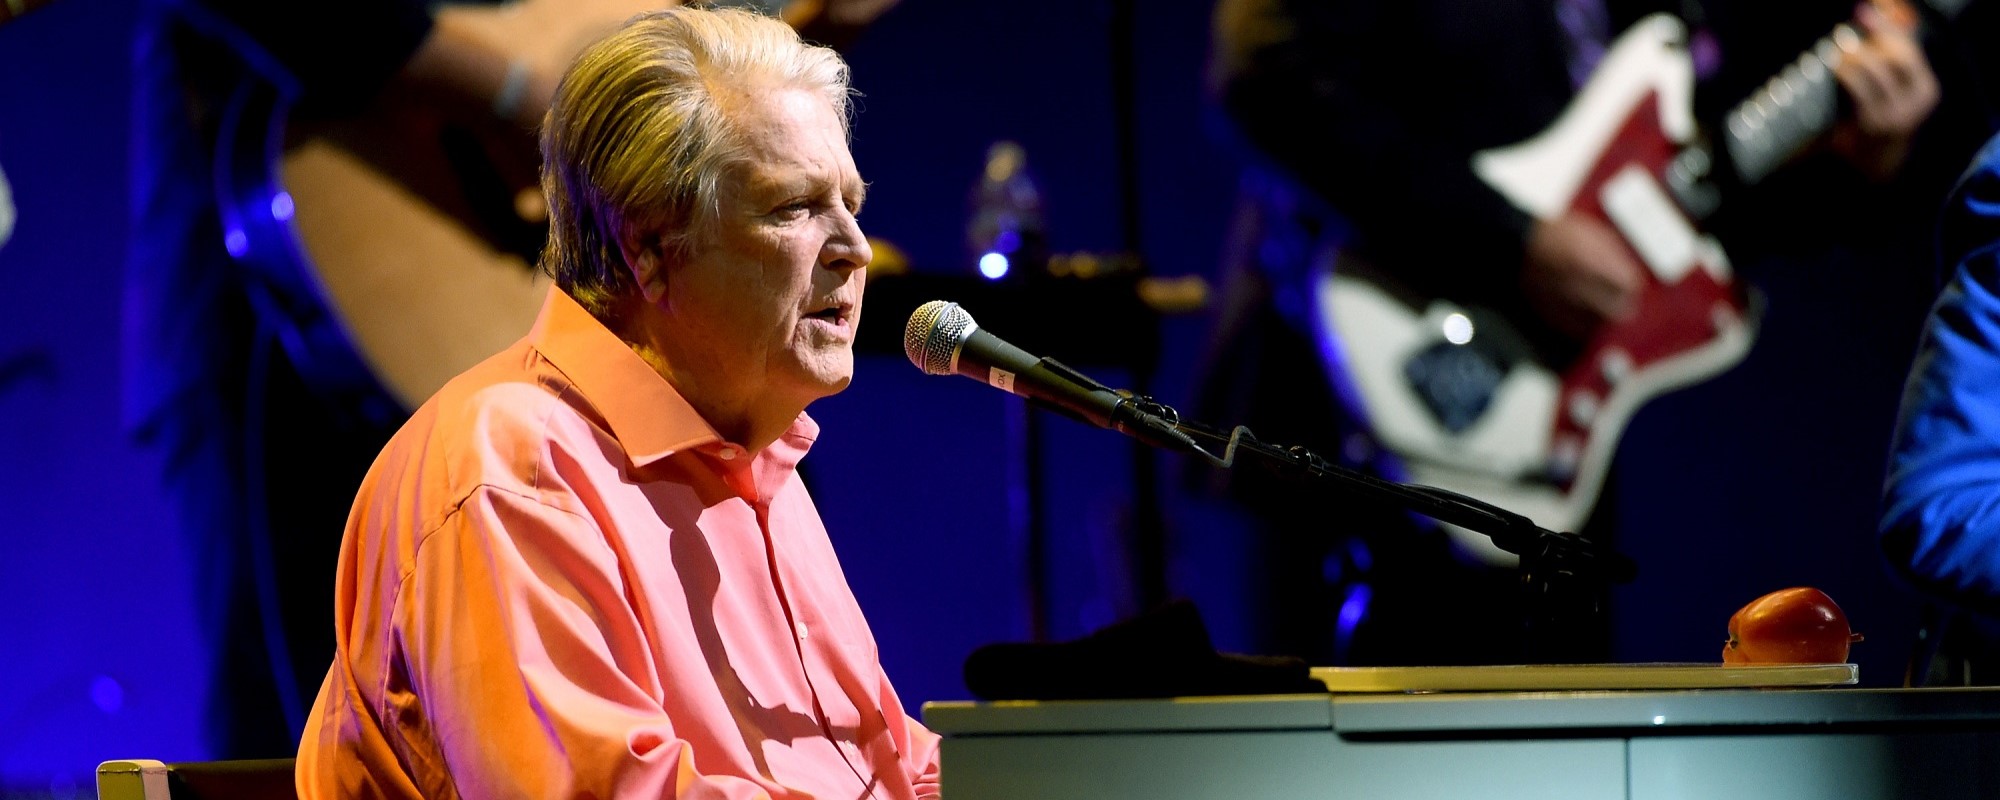 4 Fabulous Beach Boys Deep Cuts Showcasing Brian Wilson’s Vocals in Honor of His 82nd Birthday